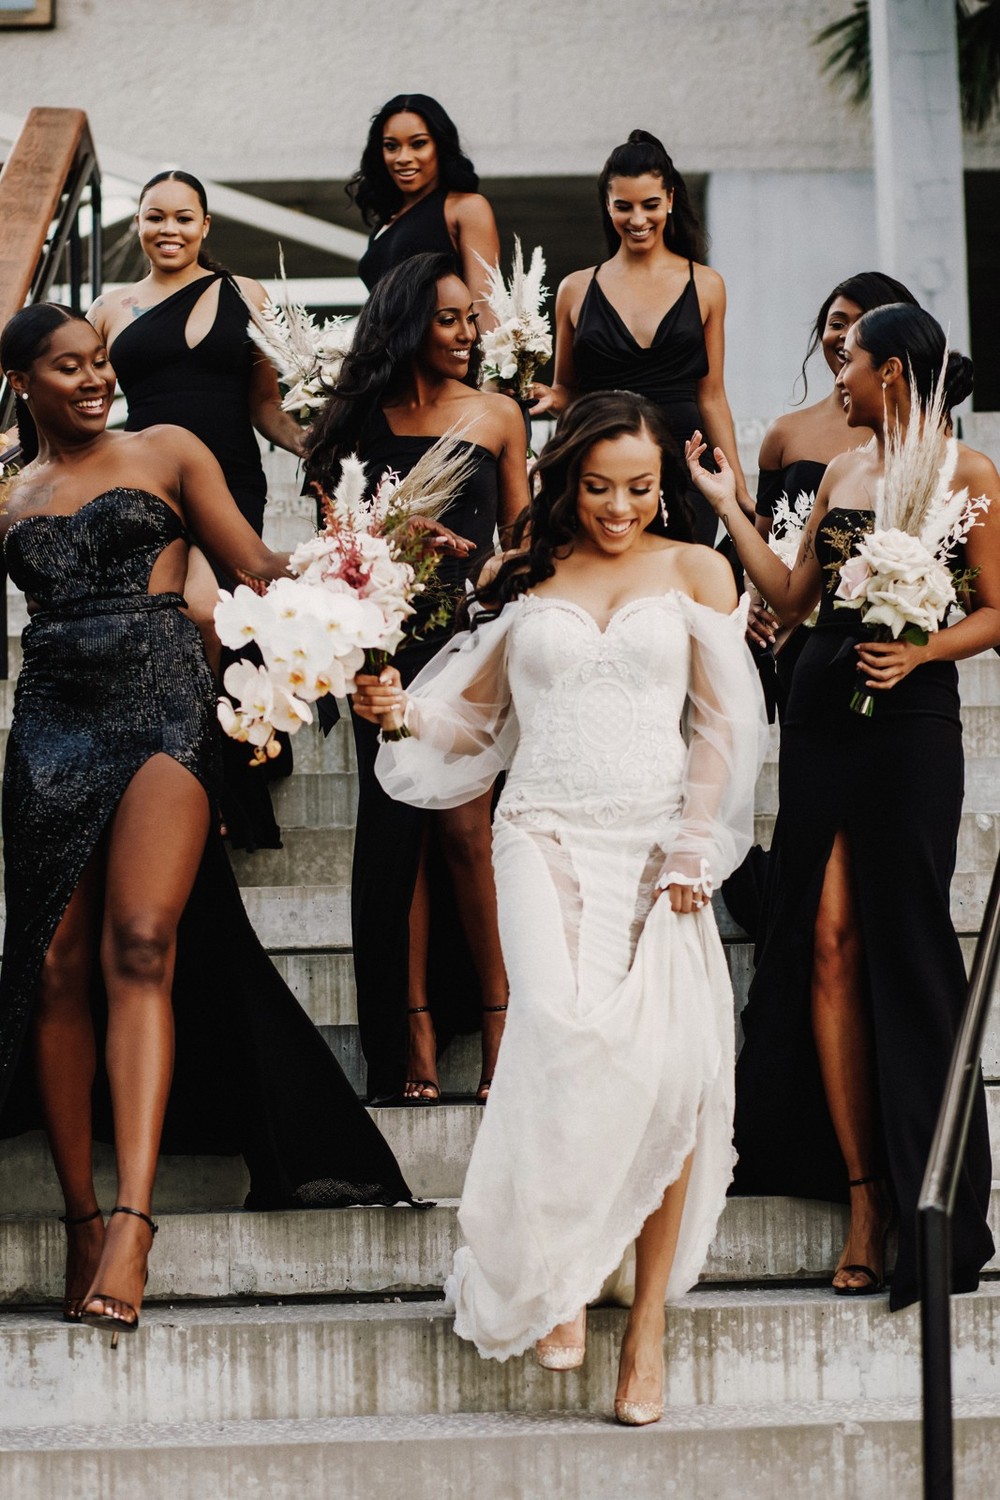 The Most Stunning Black Bridesmaid Dresses in Every Style